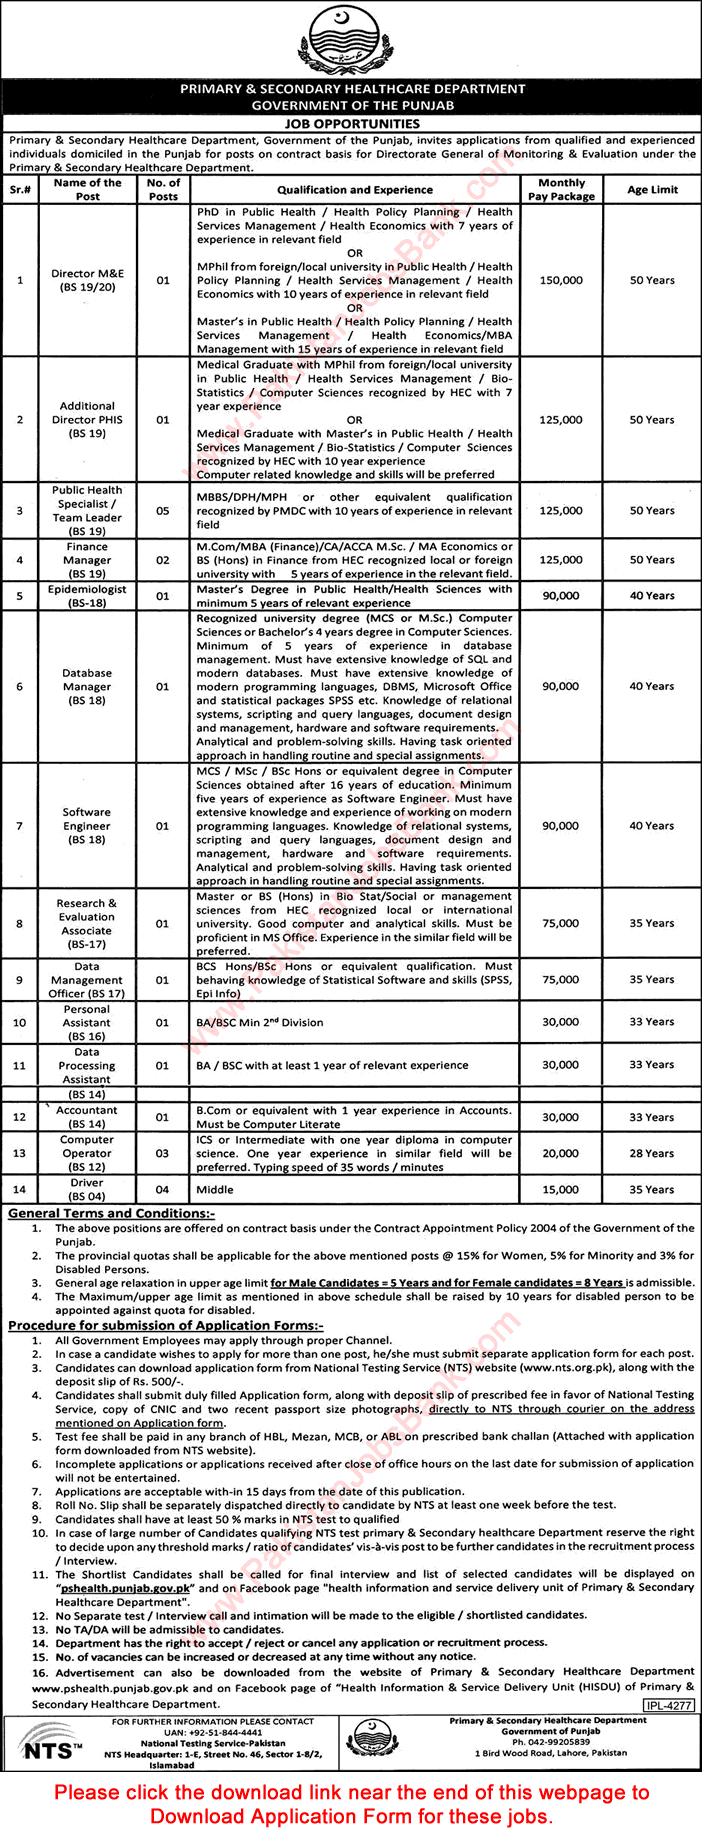 Primary and Secondary Healthcare Department Punjab Jobs April 2017 NTS Application Form Latest